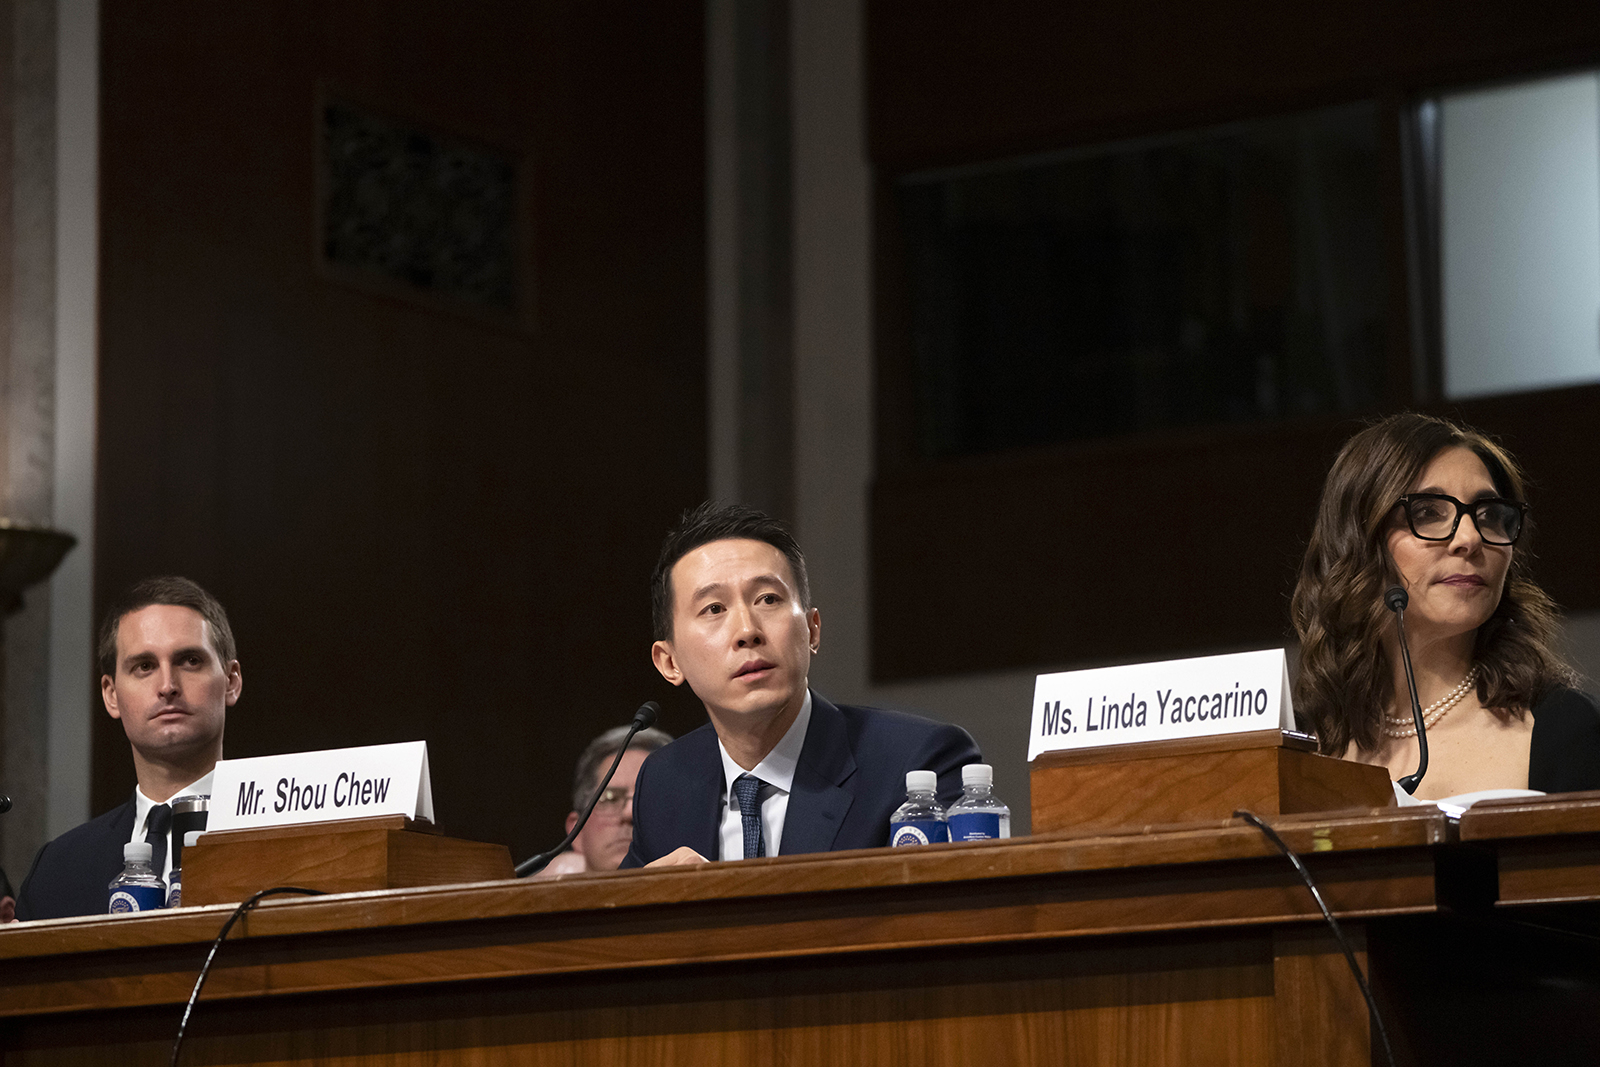 TikTok CEO Shou Zi Chew, center, speaks as Snap CEO Evan Spiegel, left, and X CEO Linda Yaccarino, right, listen during the Senate Judiciary Committee's hearing on online child safety on Capitol Hill, today.